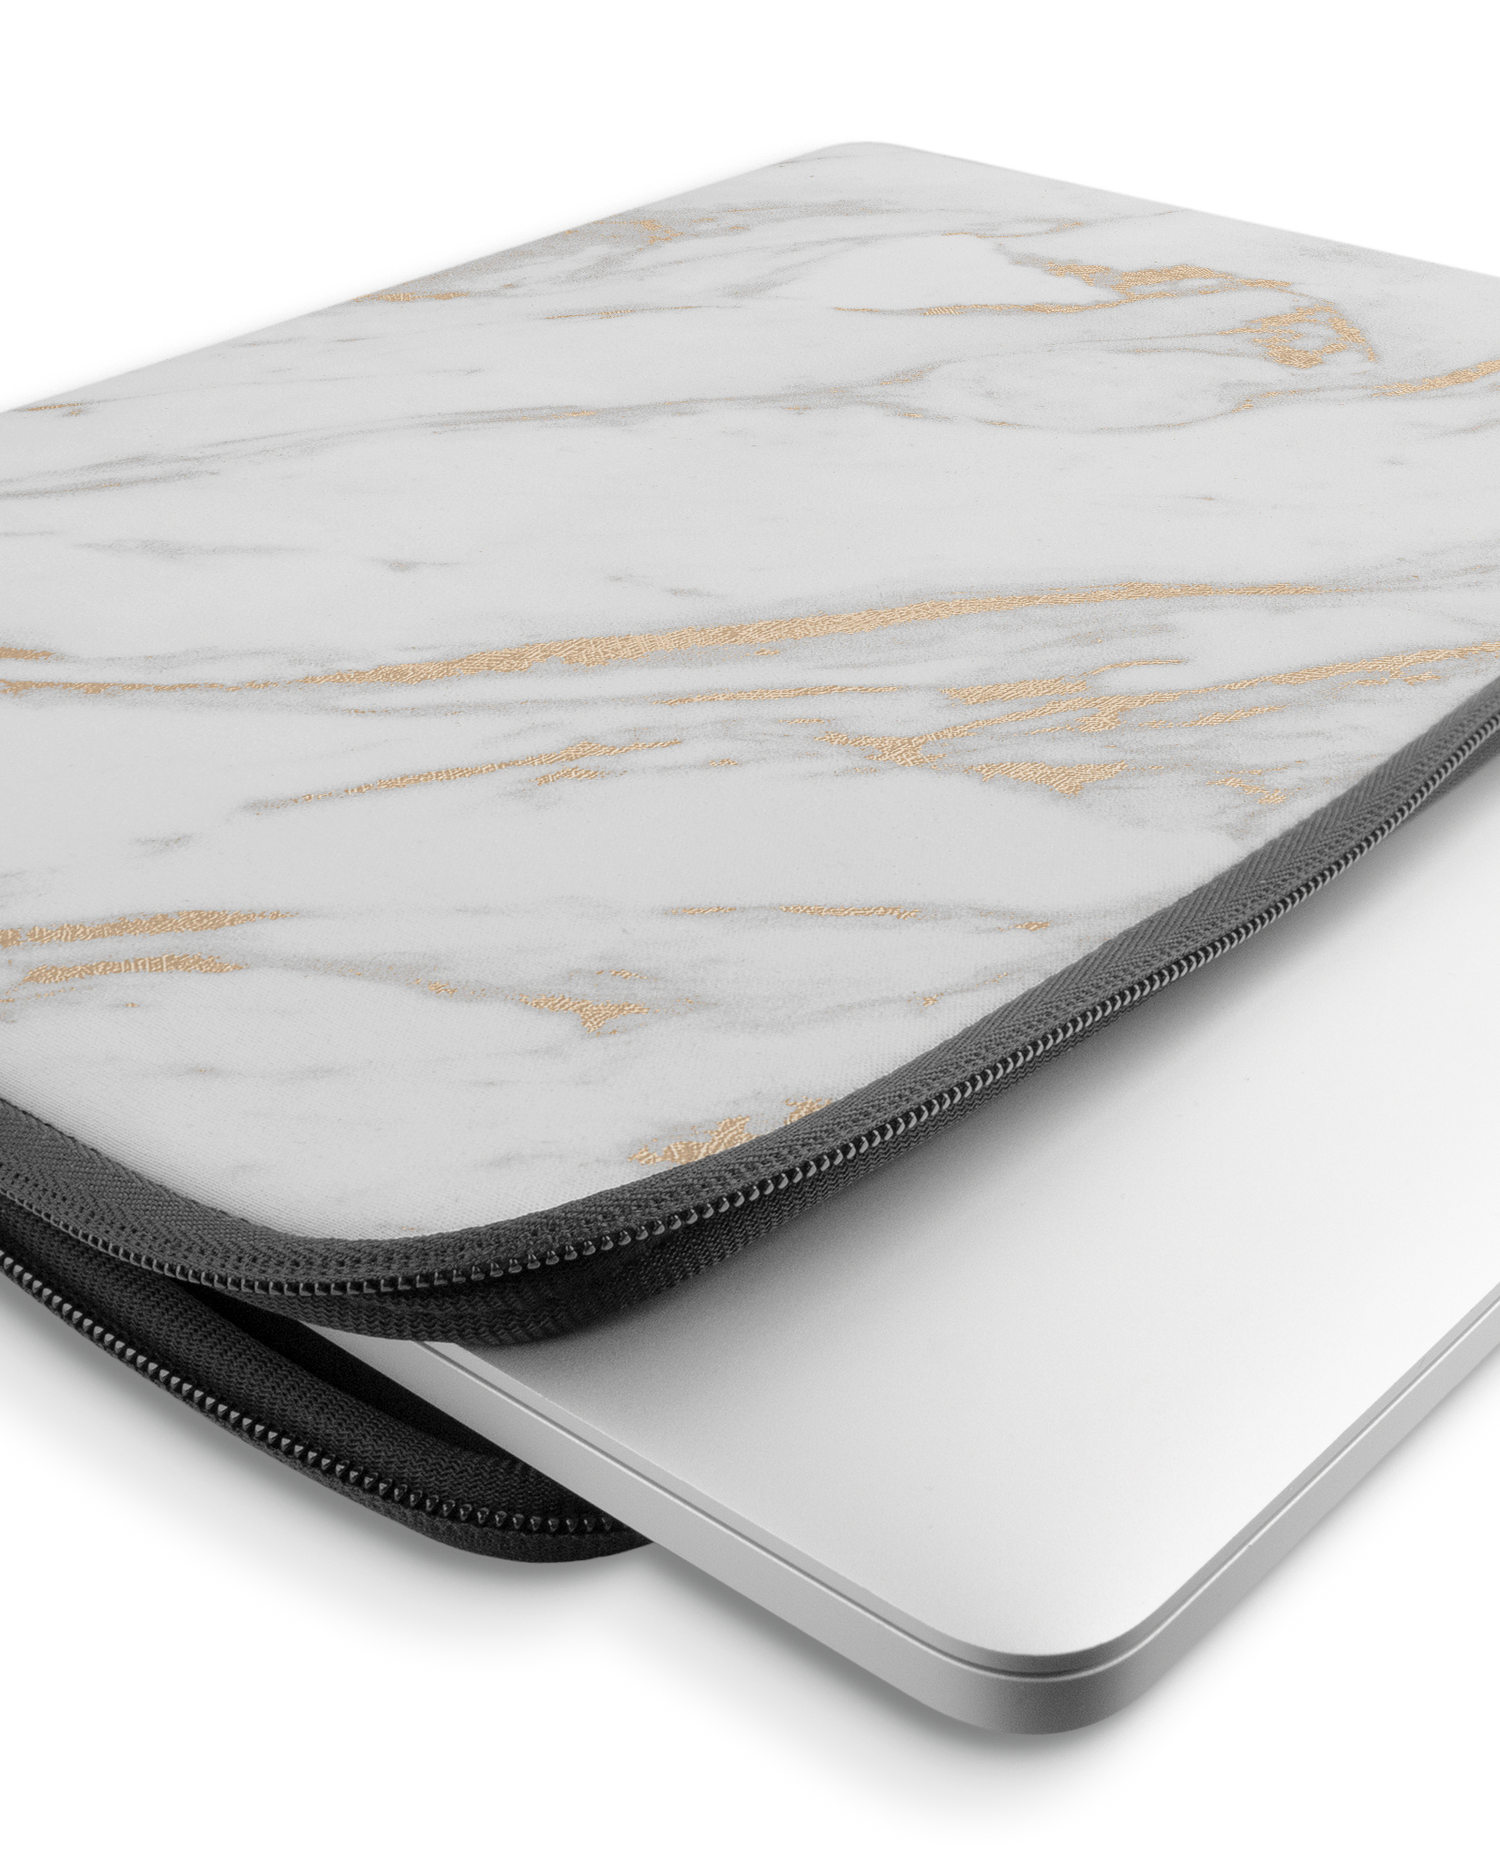 Gold Marble Elegance Laptop Case 15-16 inch with device inside